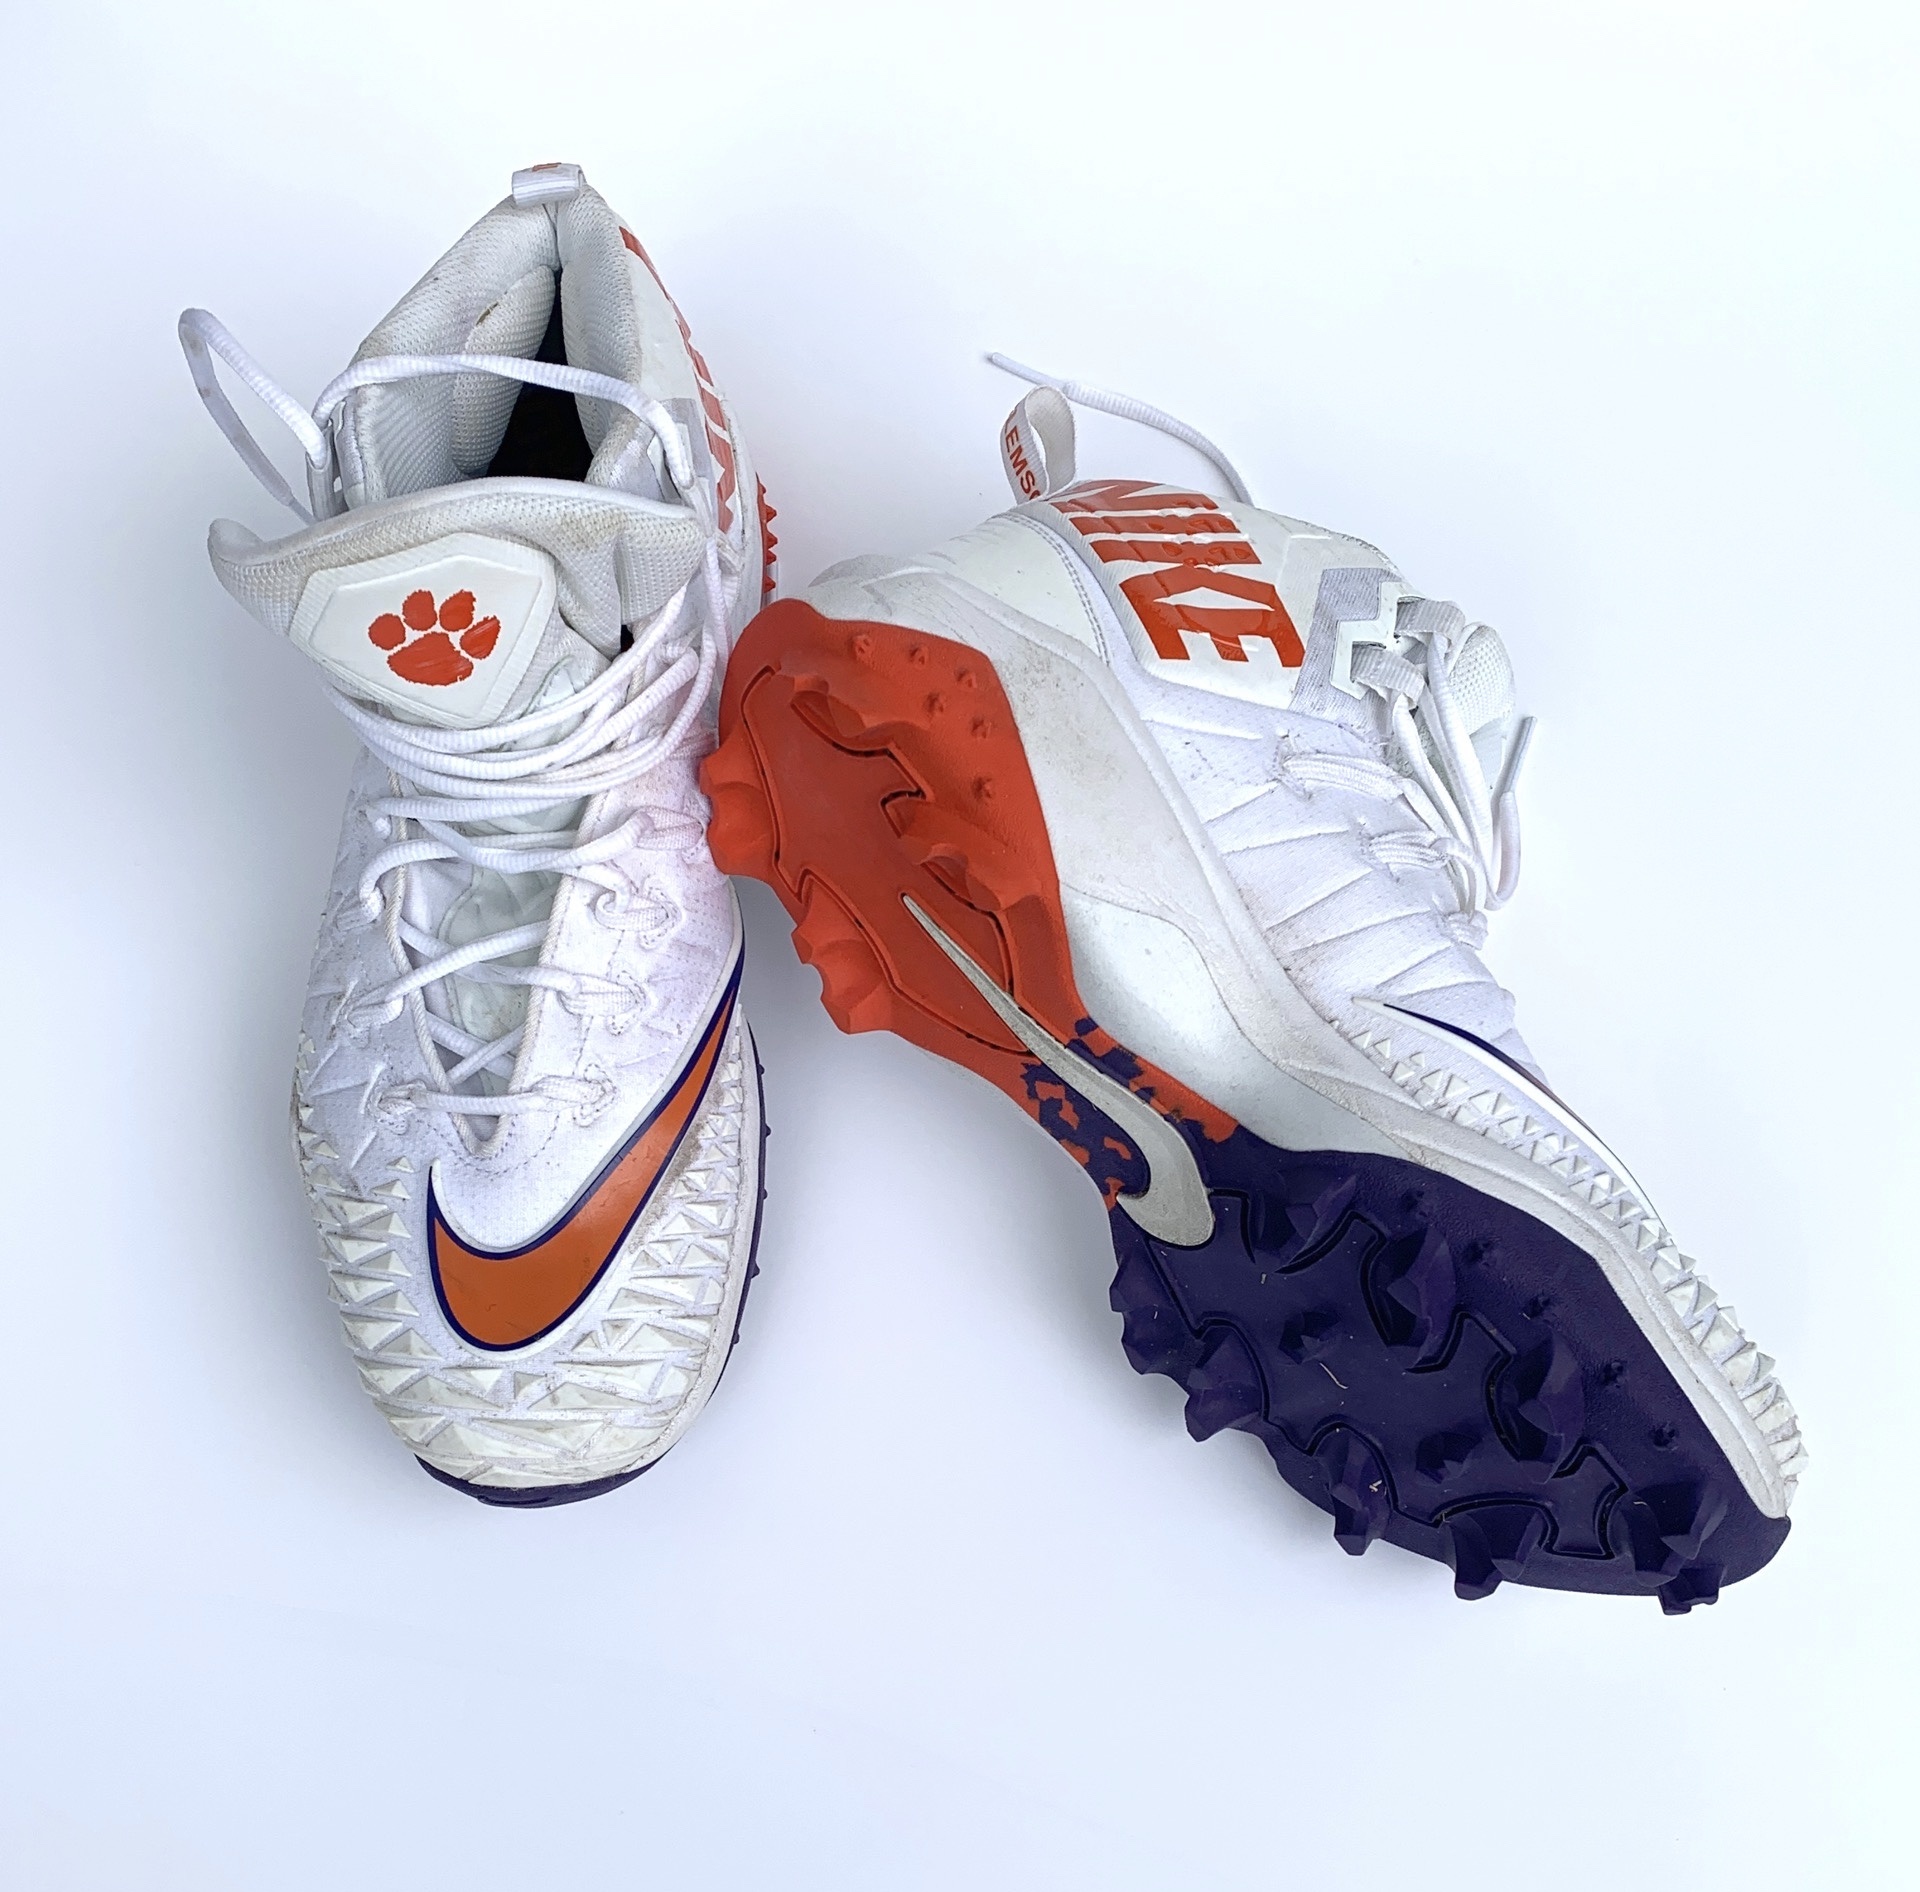 Clemson Football Cleats - NARP Clothing